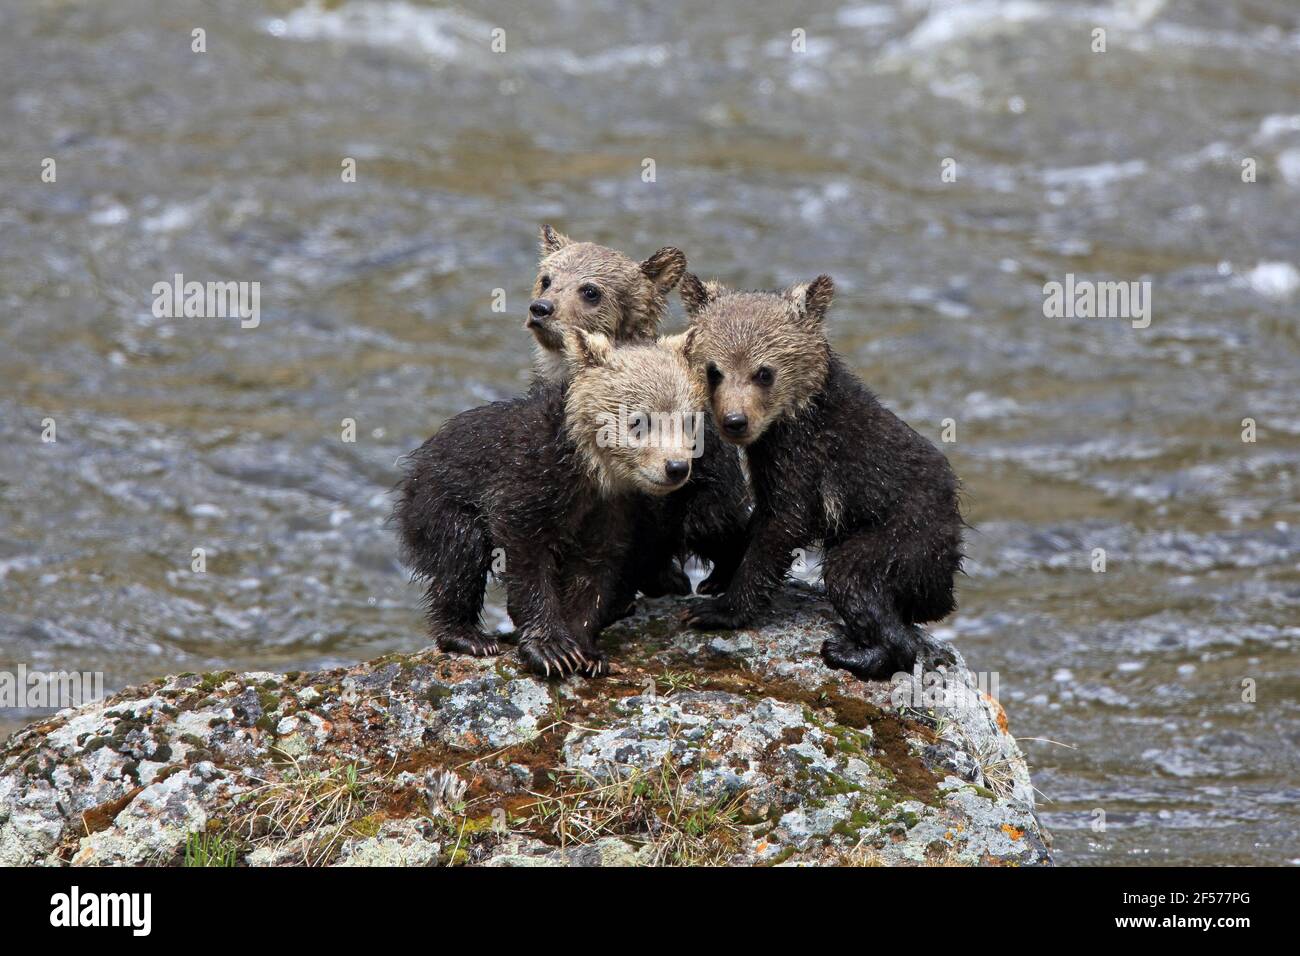 Three Grizzly bear cubs standing on a rock in a river Stock Photo